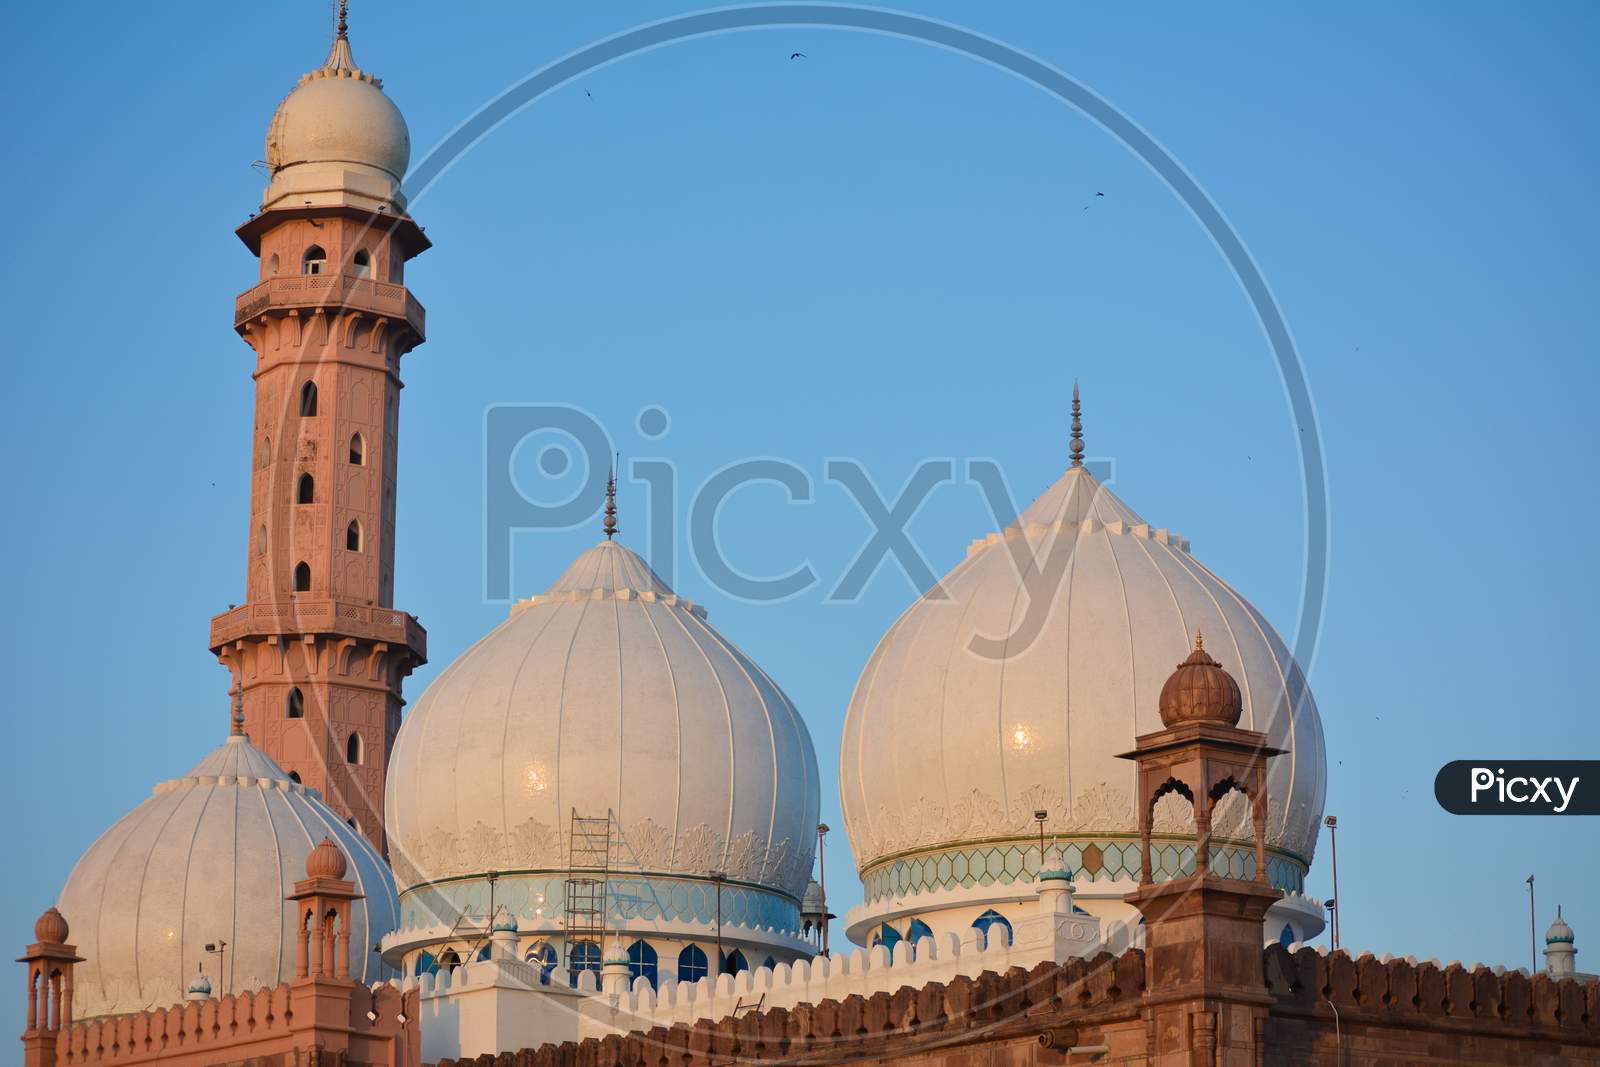 Taj-ul-Masajid is a mosque situated in Bhopal, Madhya Pradesh state, India. One of the largest mosques in Asia's